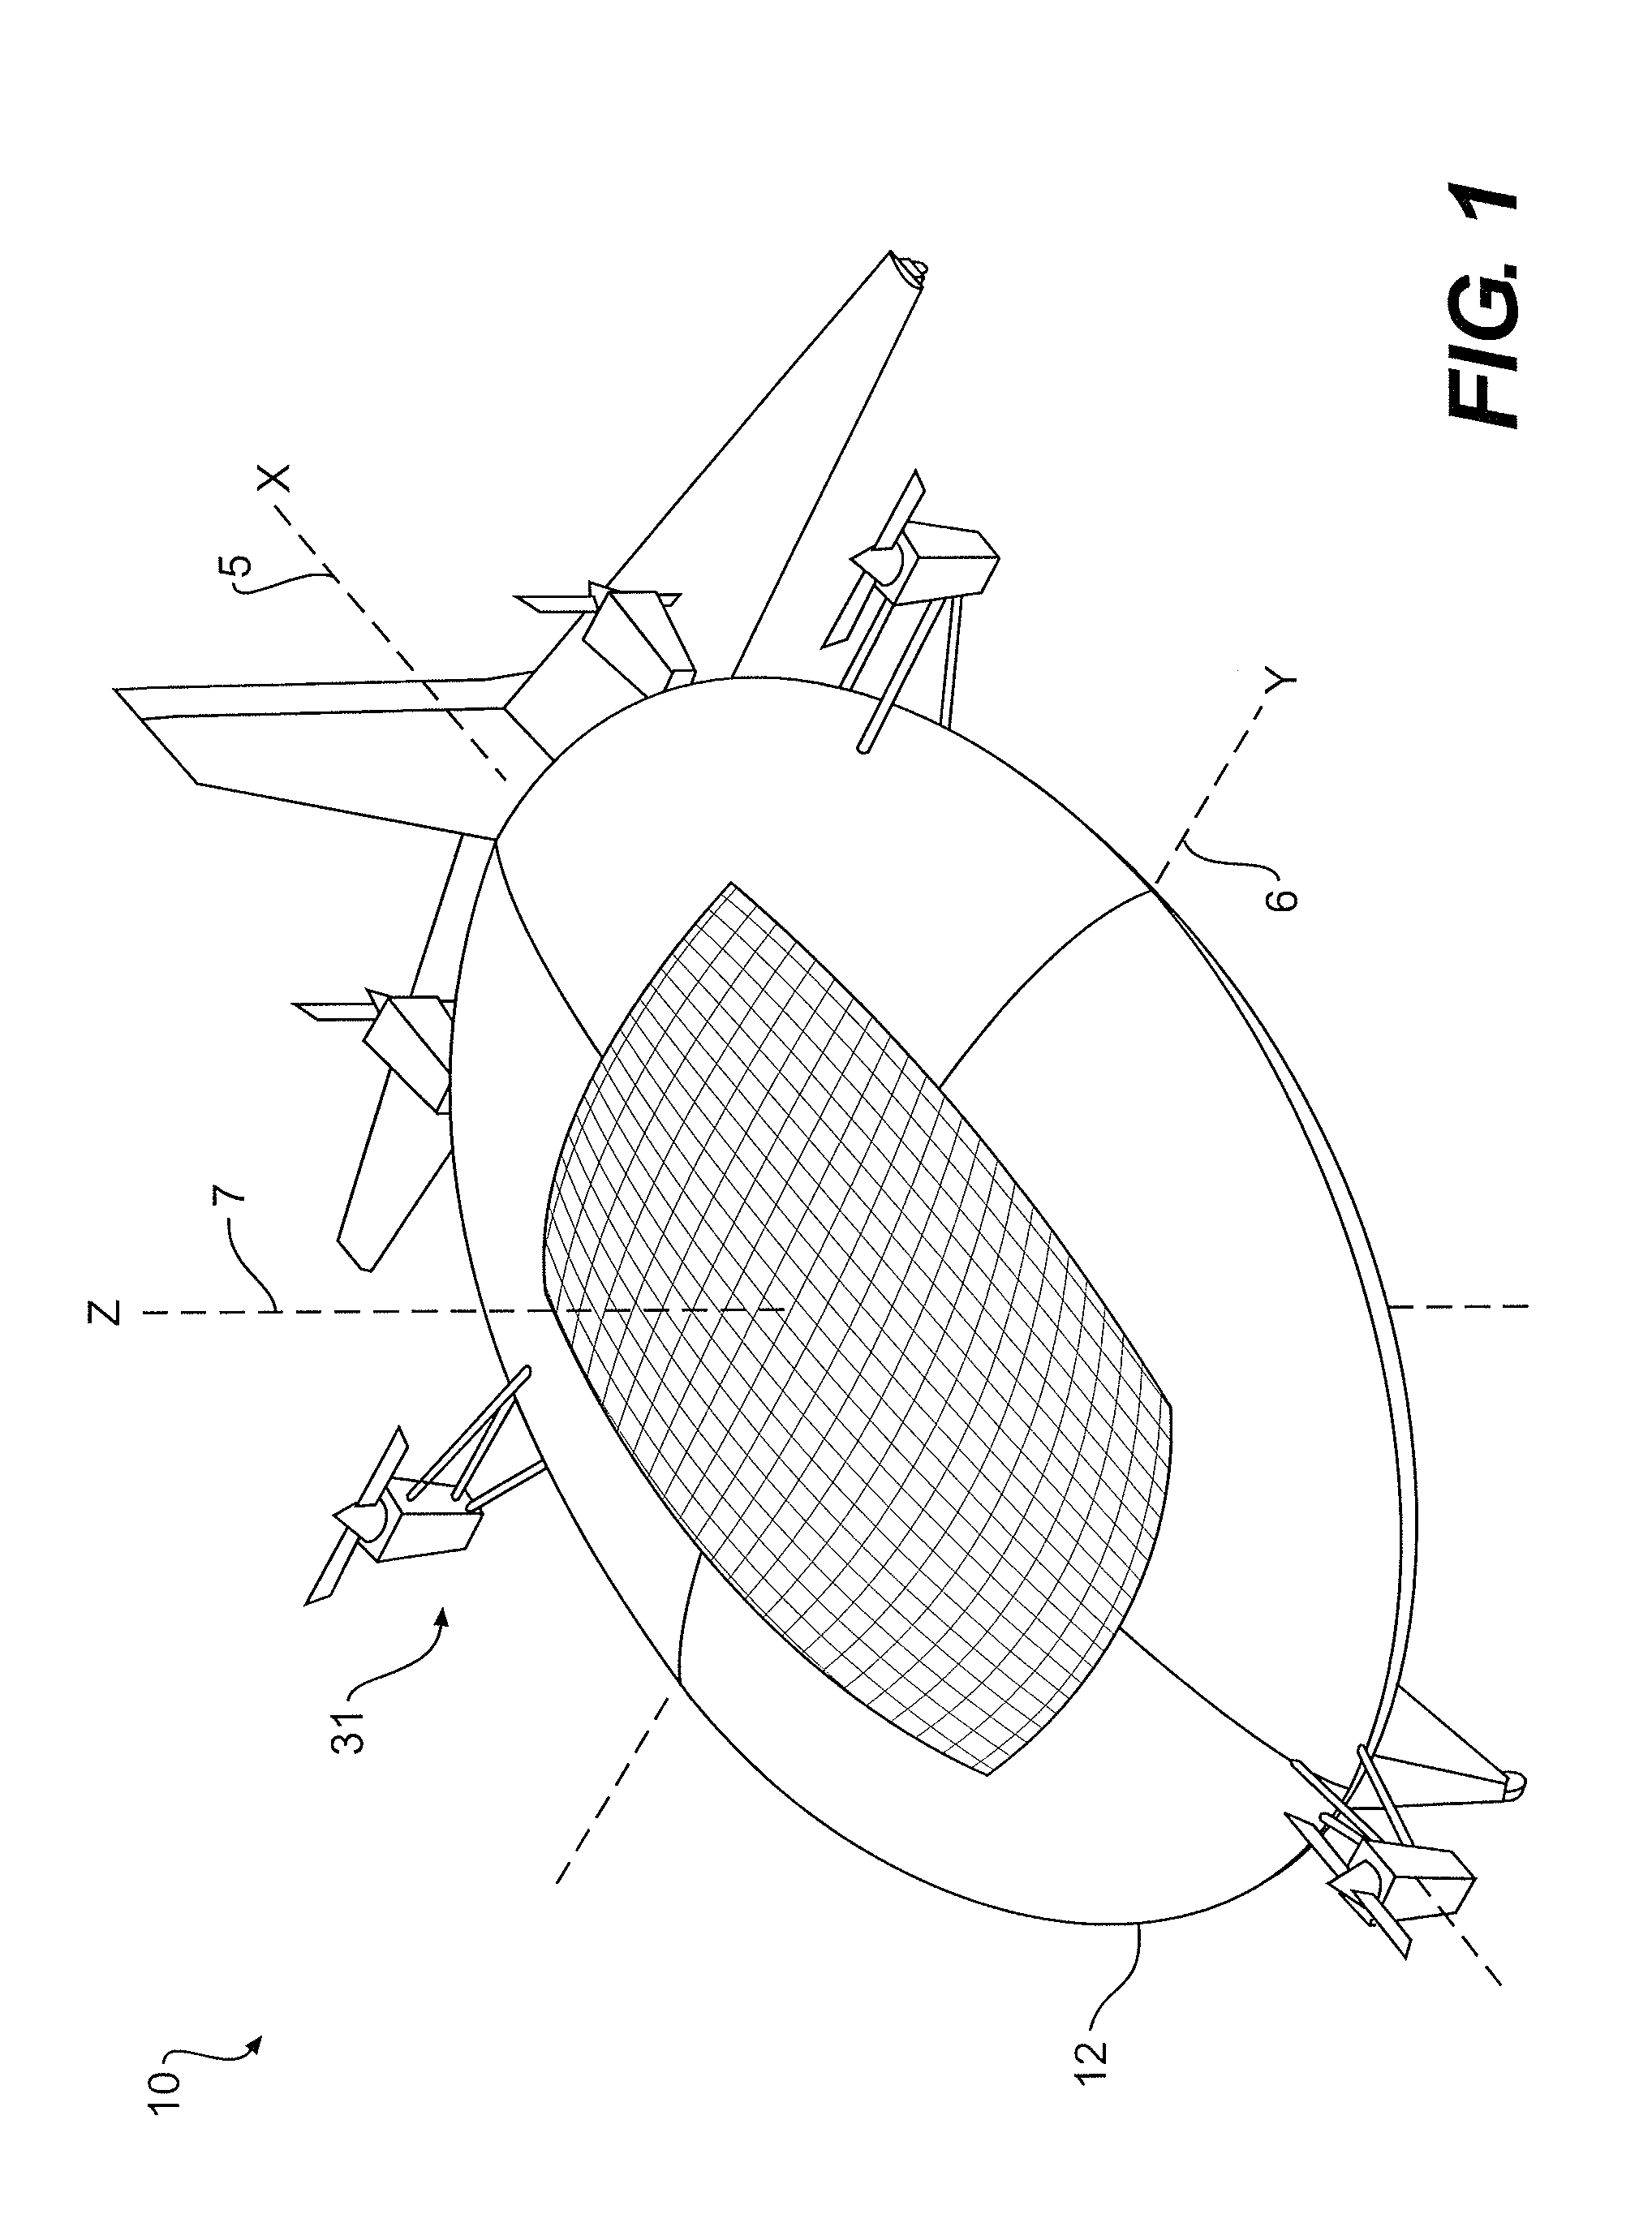 System and method for solar-powered airship